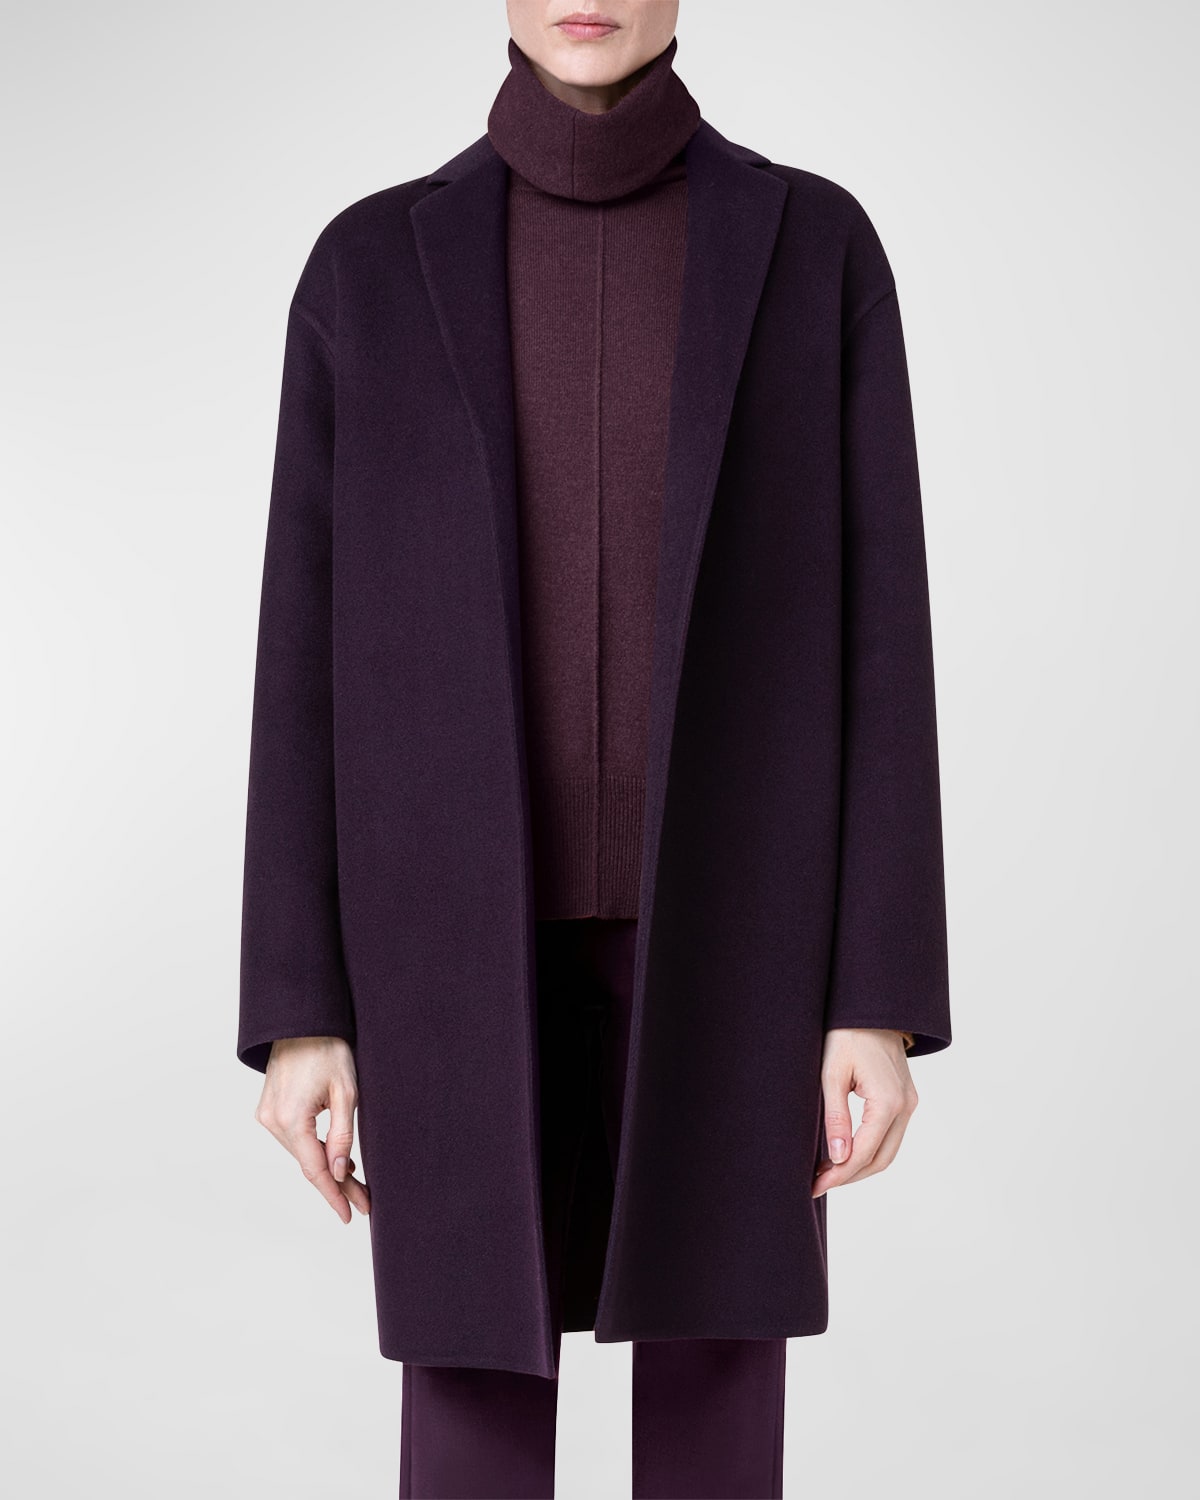 Two-Tone Cashmere Top Coat